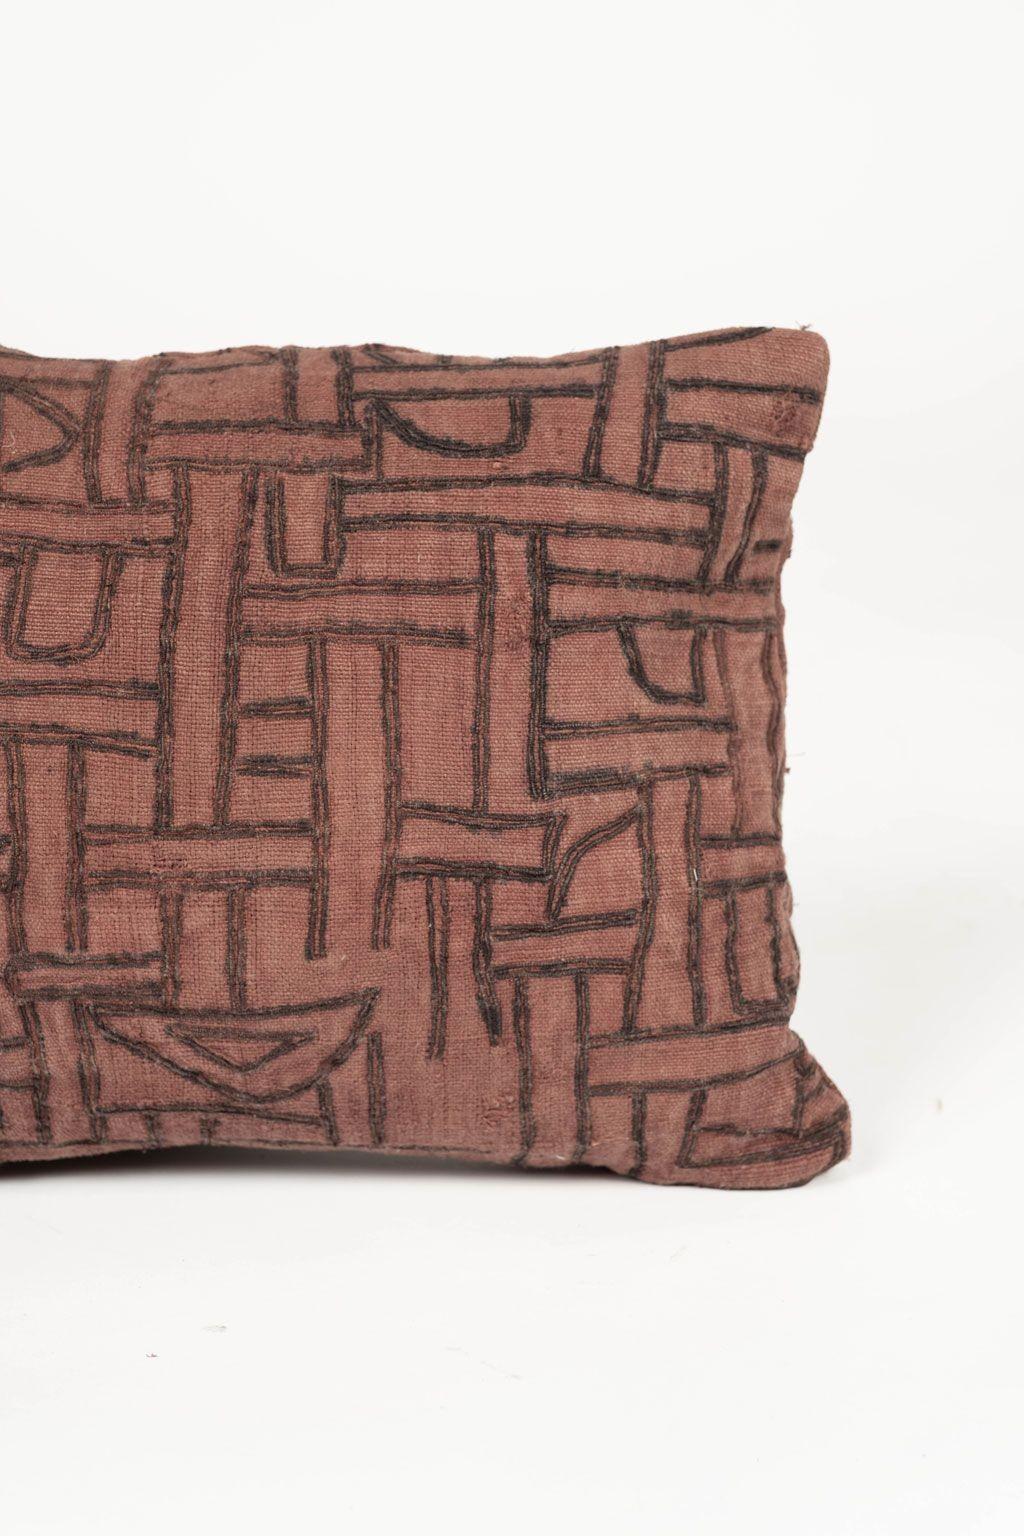 Faded plum-color embroidered small lumbar cushion made from an antique handwoven and hand-dyed cotton tribal textile (circa 1930-1954). Hand-sewn into a gorgeous self-backed cushion that includes zip fastener and feather insert. Three more larger